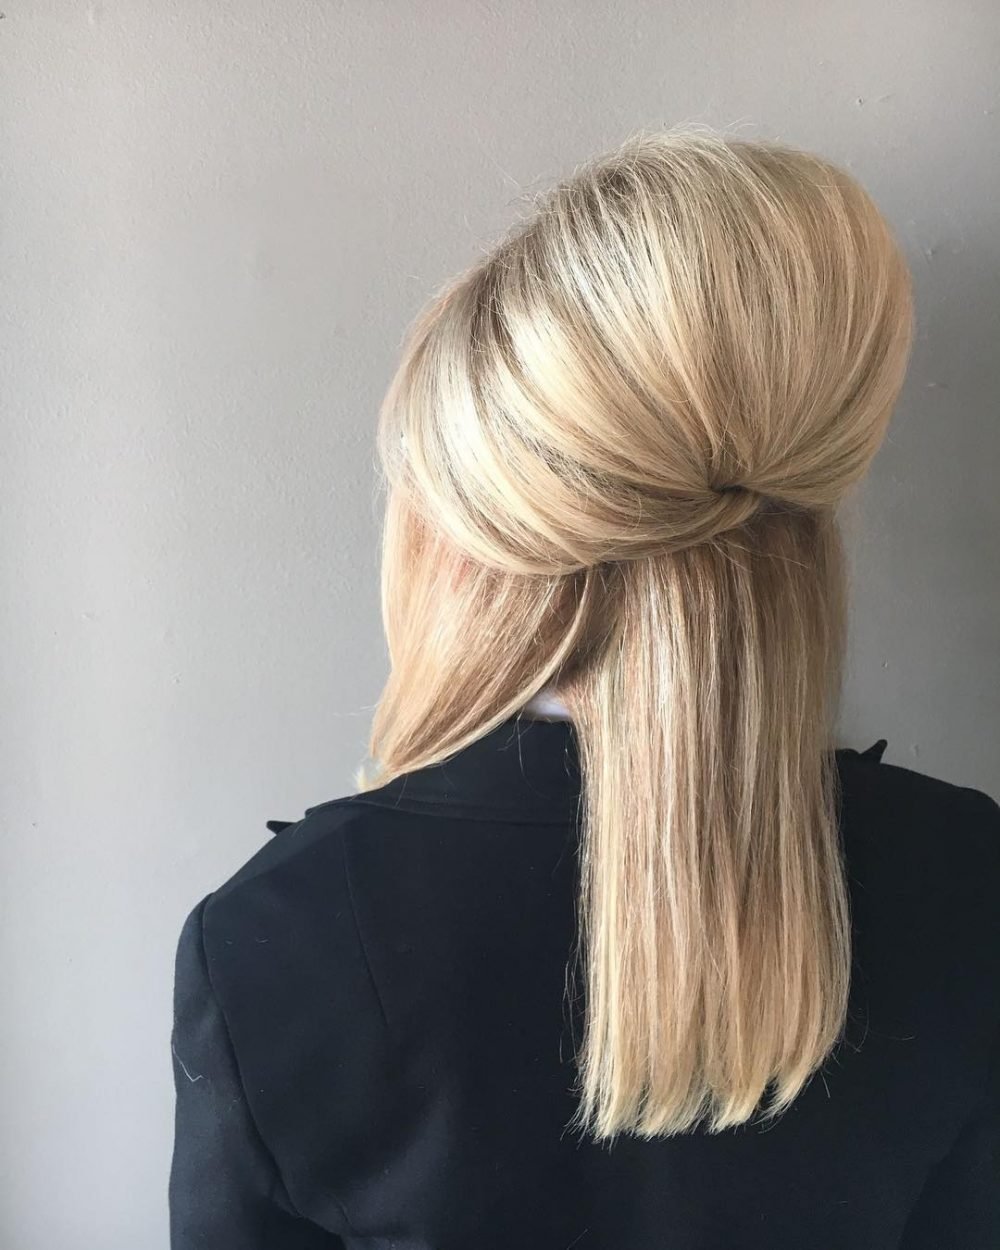 Modern-Day Beehive hairstyle